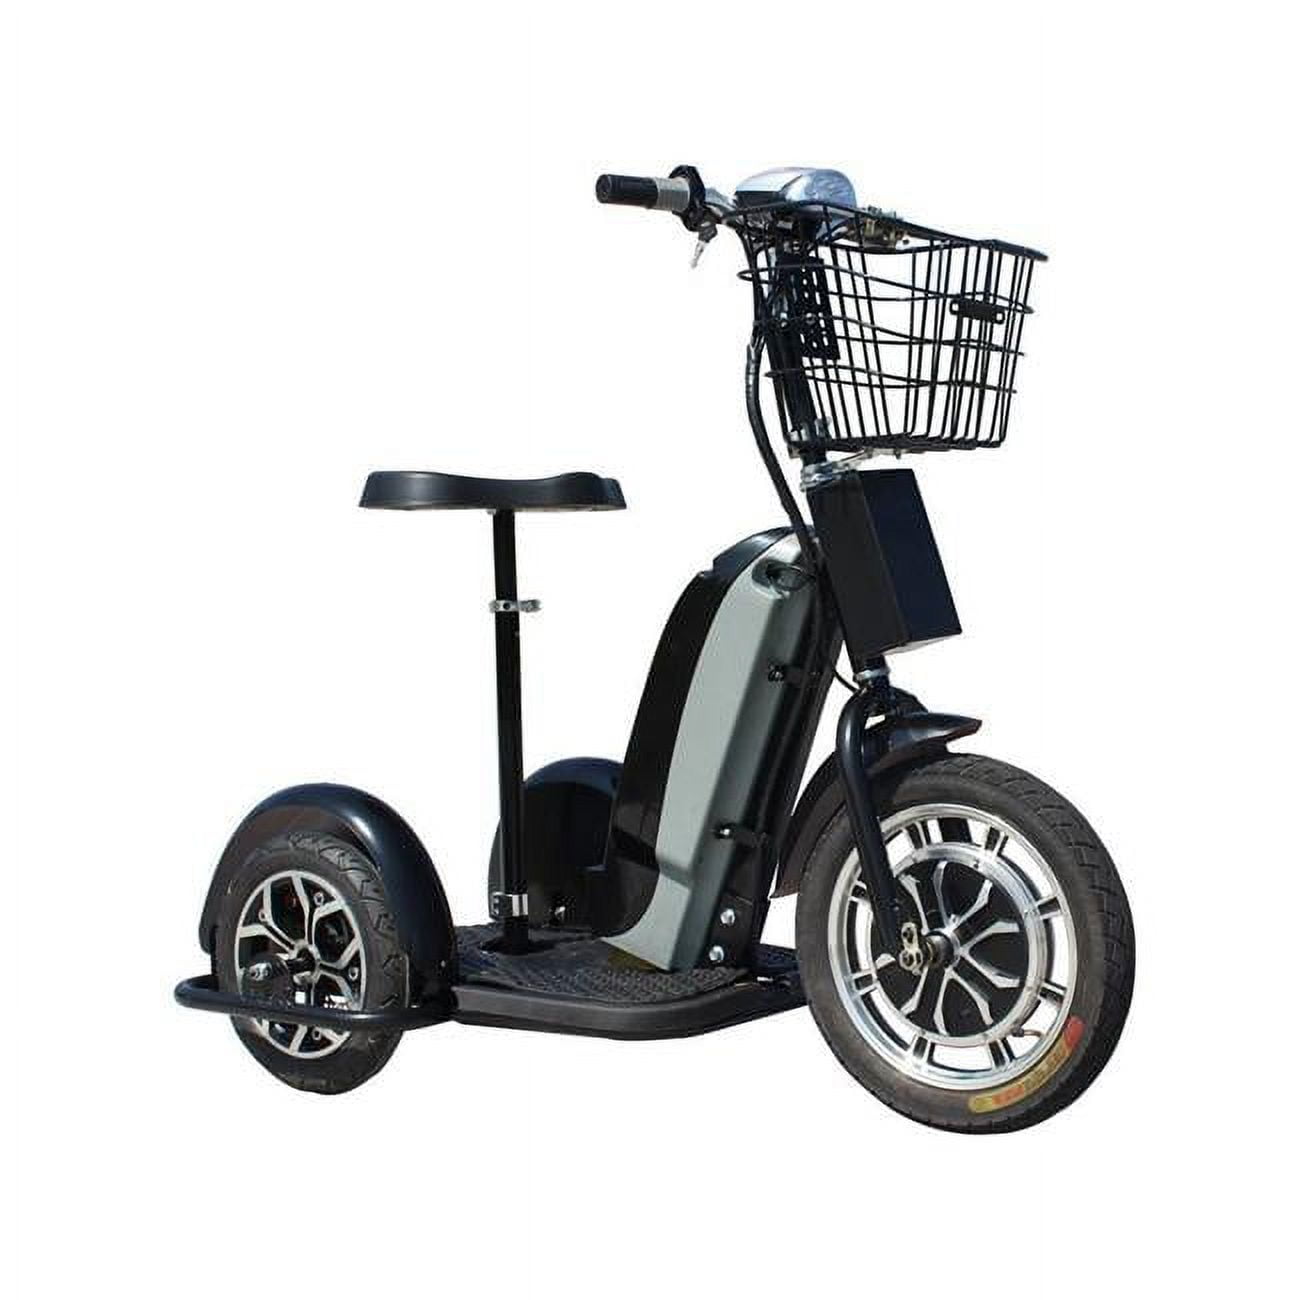 Picture of MotoTec MT-TRK-800 48V Electric Trike, 800W